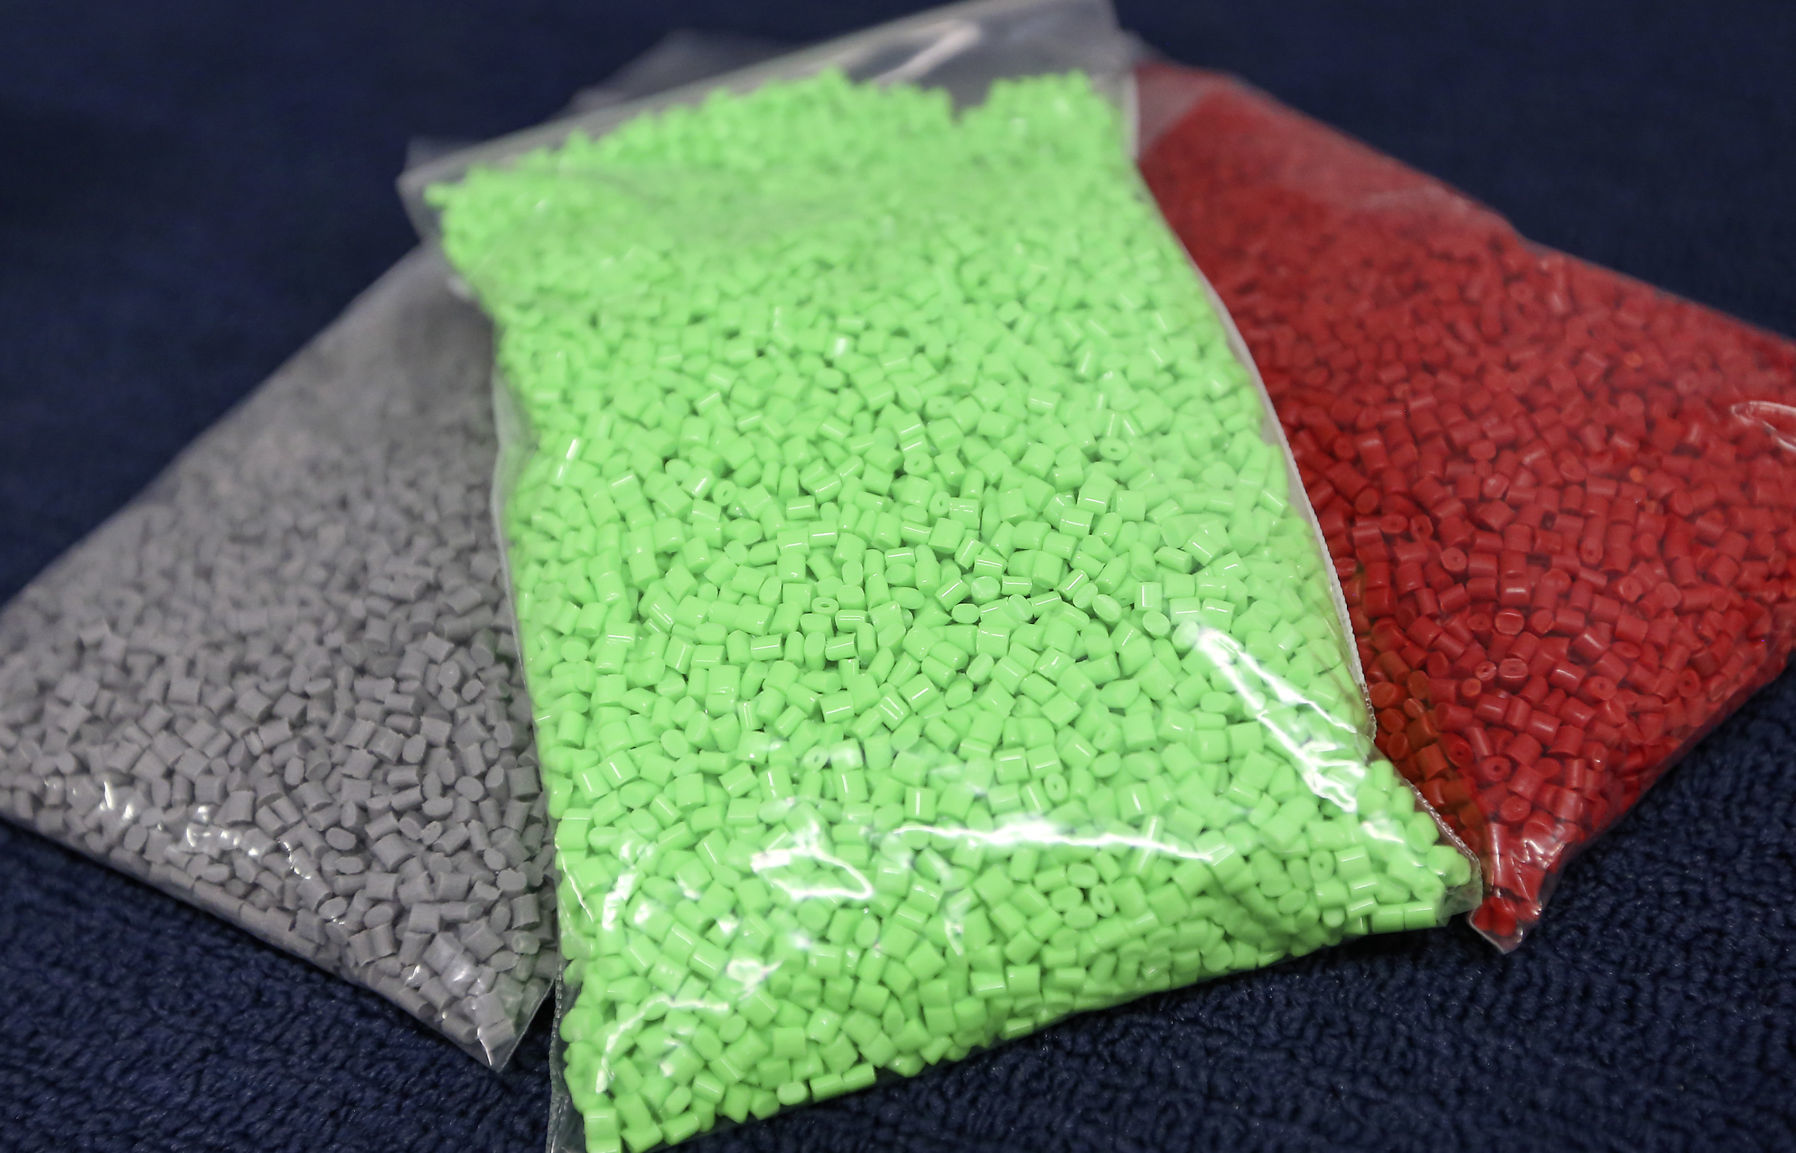 Finished plastic pellets in a variety of colors at JEDA Polymers in Dyersville, Iowa, on Monday, July 30, 2018.    PHOTO CREDIT: NICKI KOHL